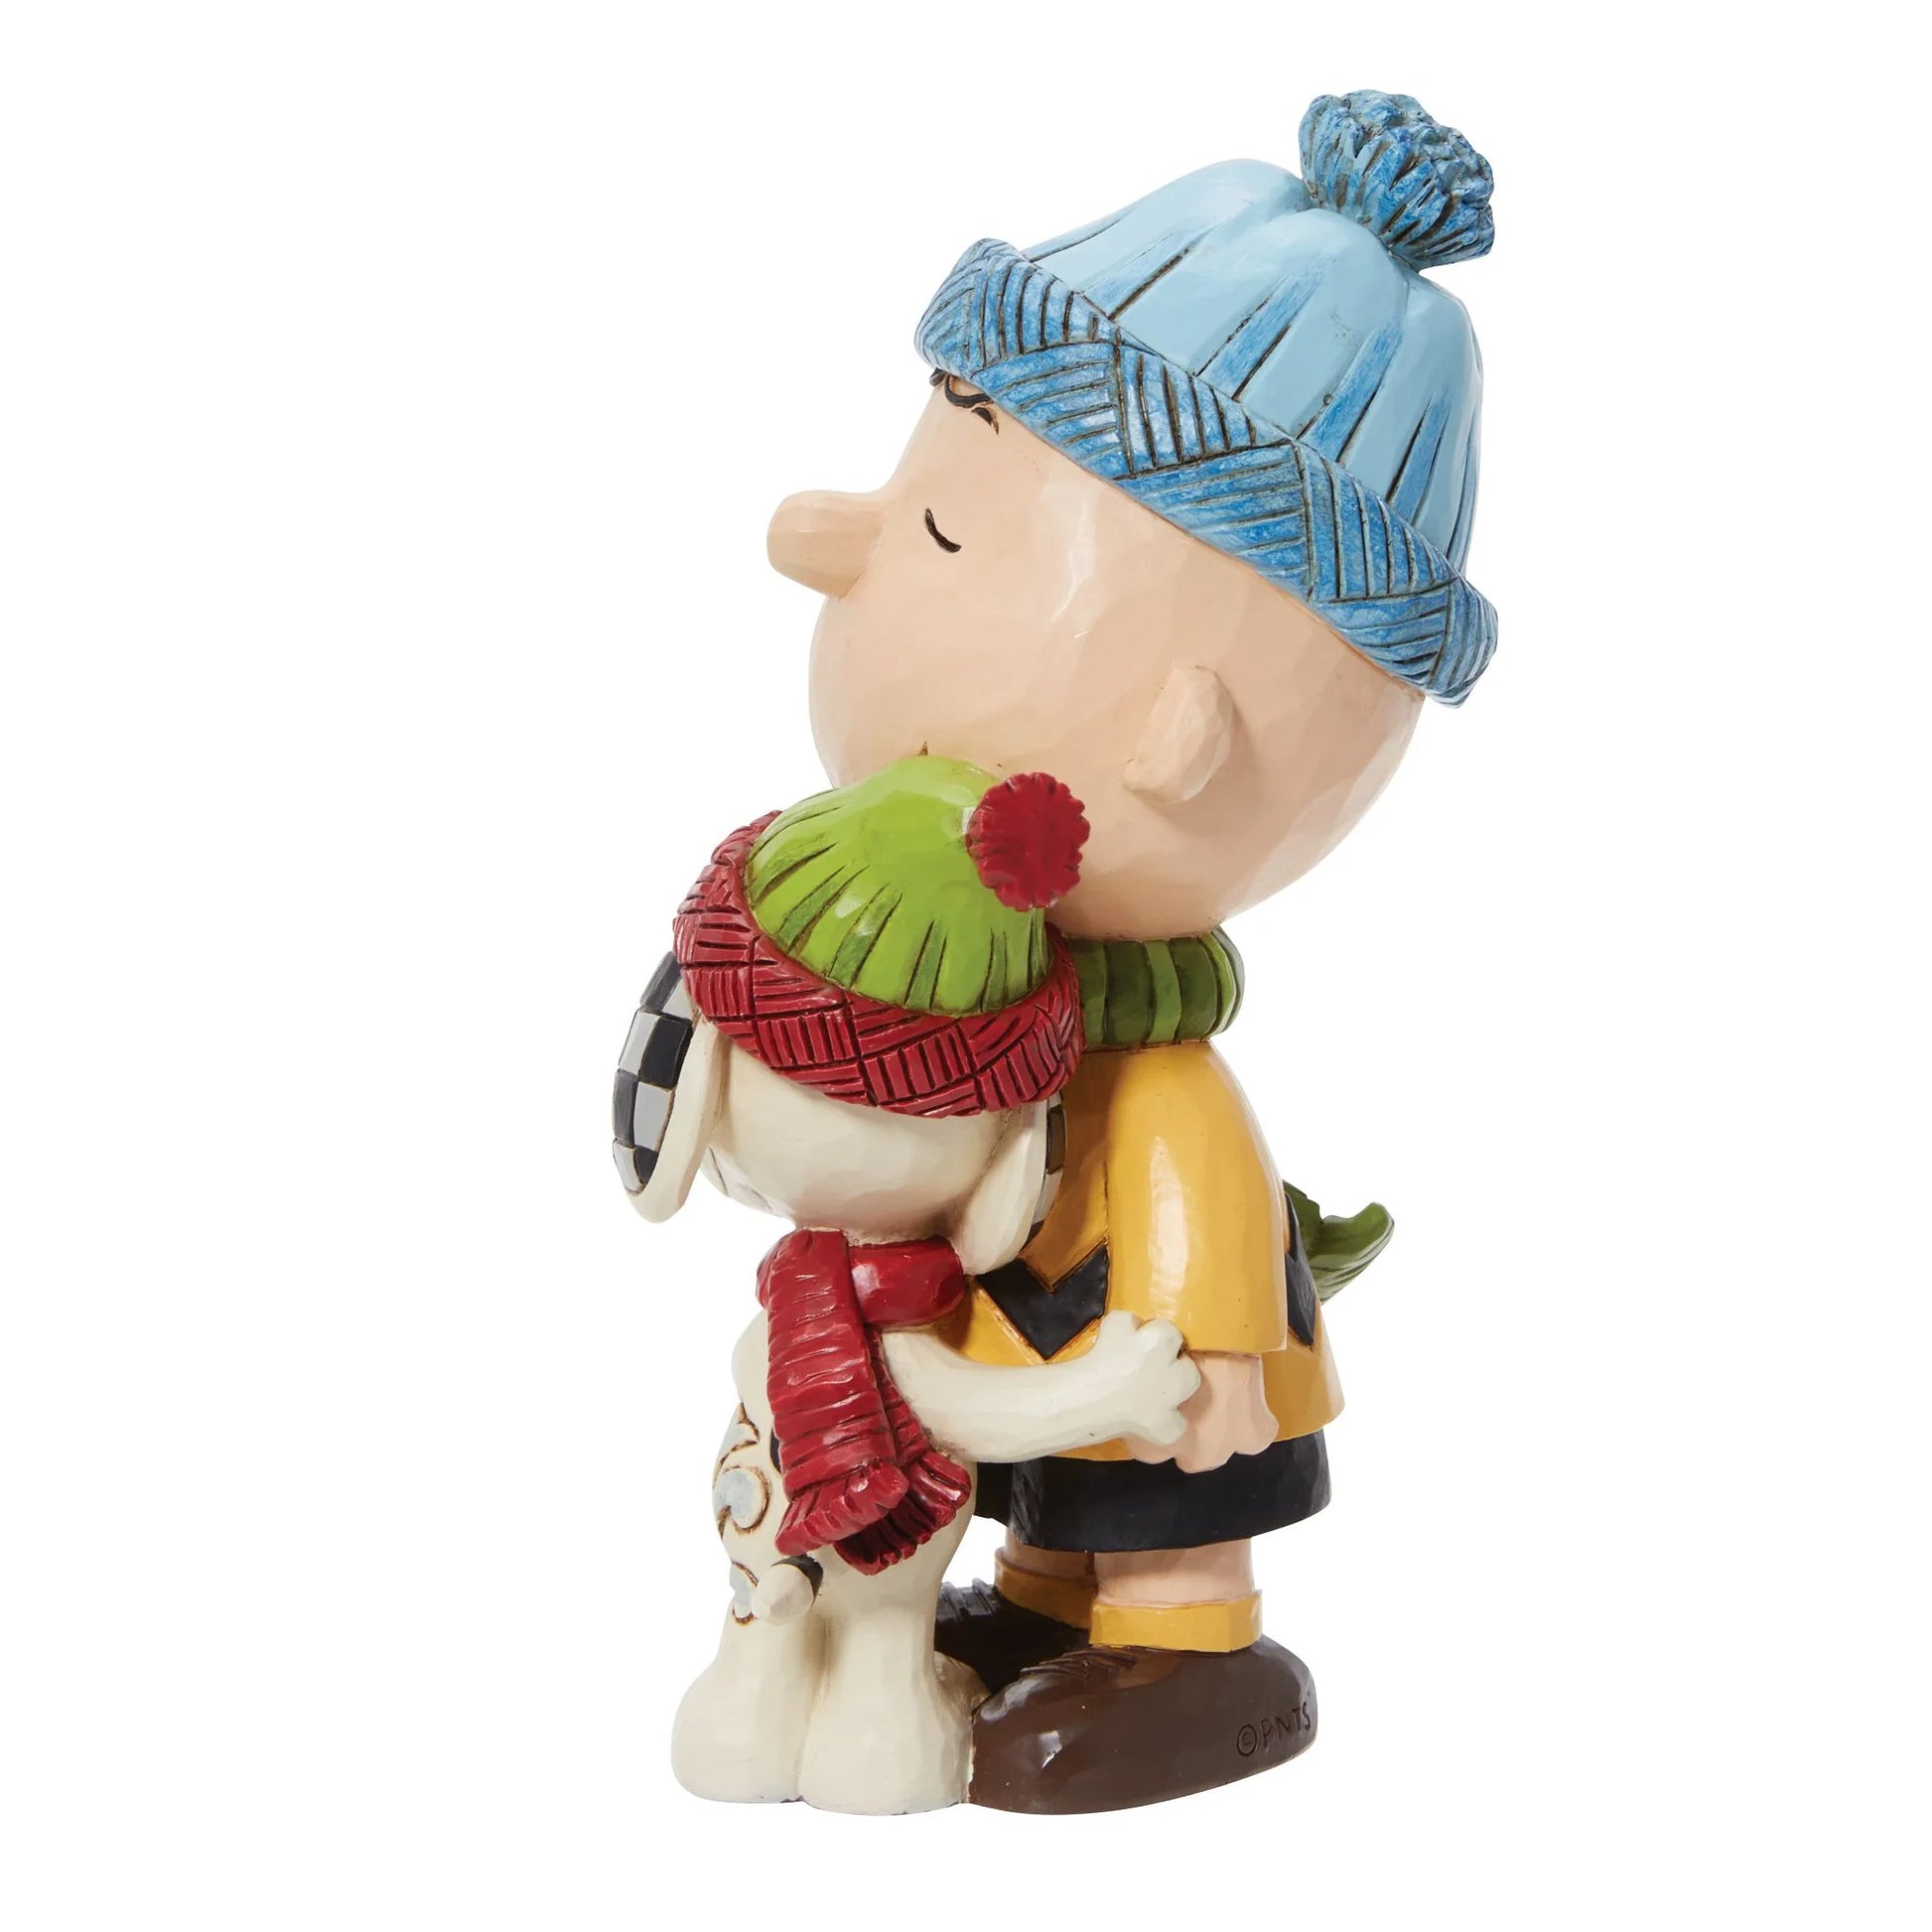 snoopy and charlie figurine left side